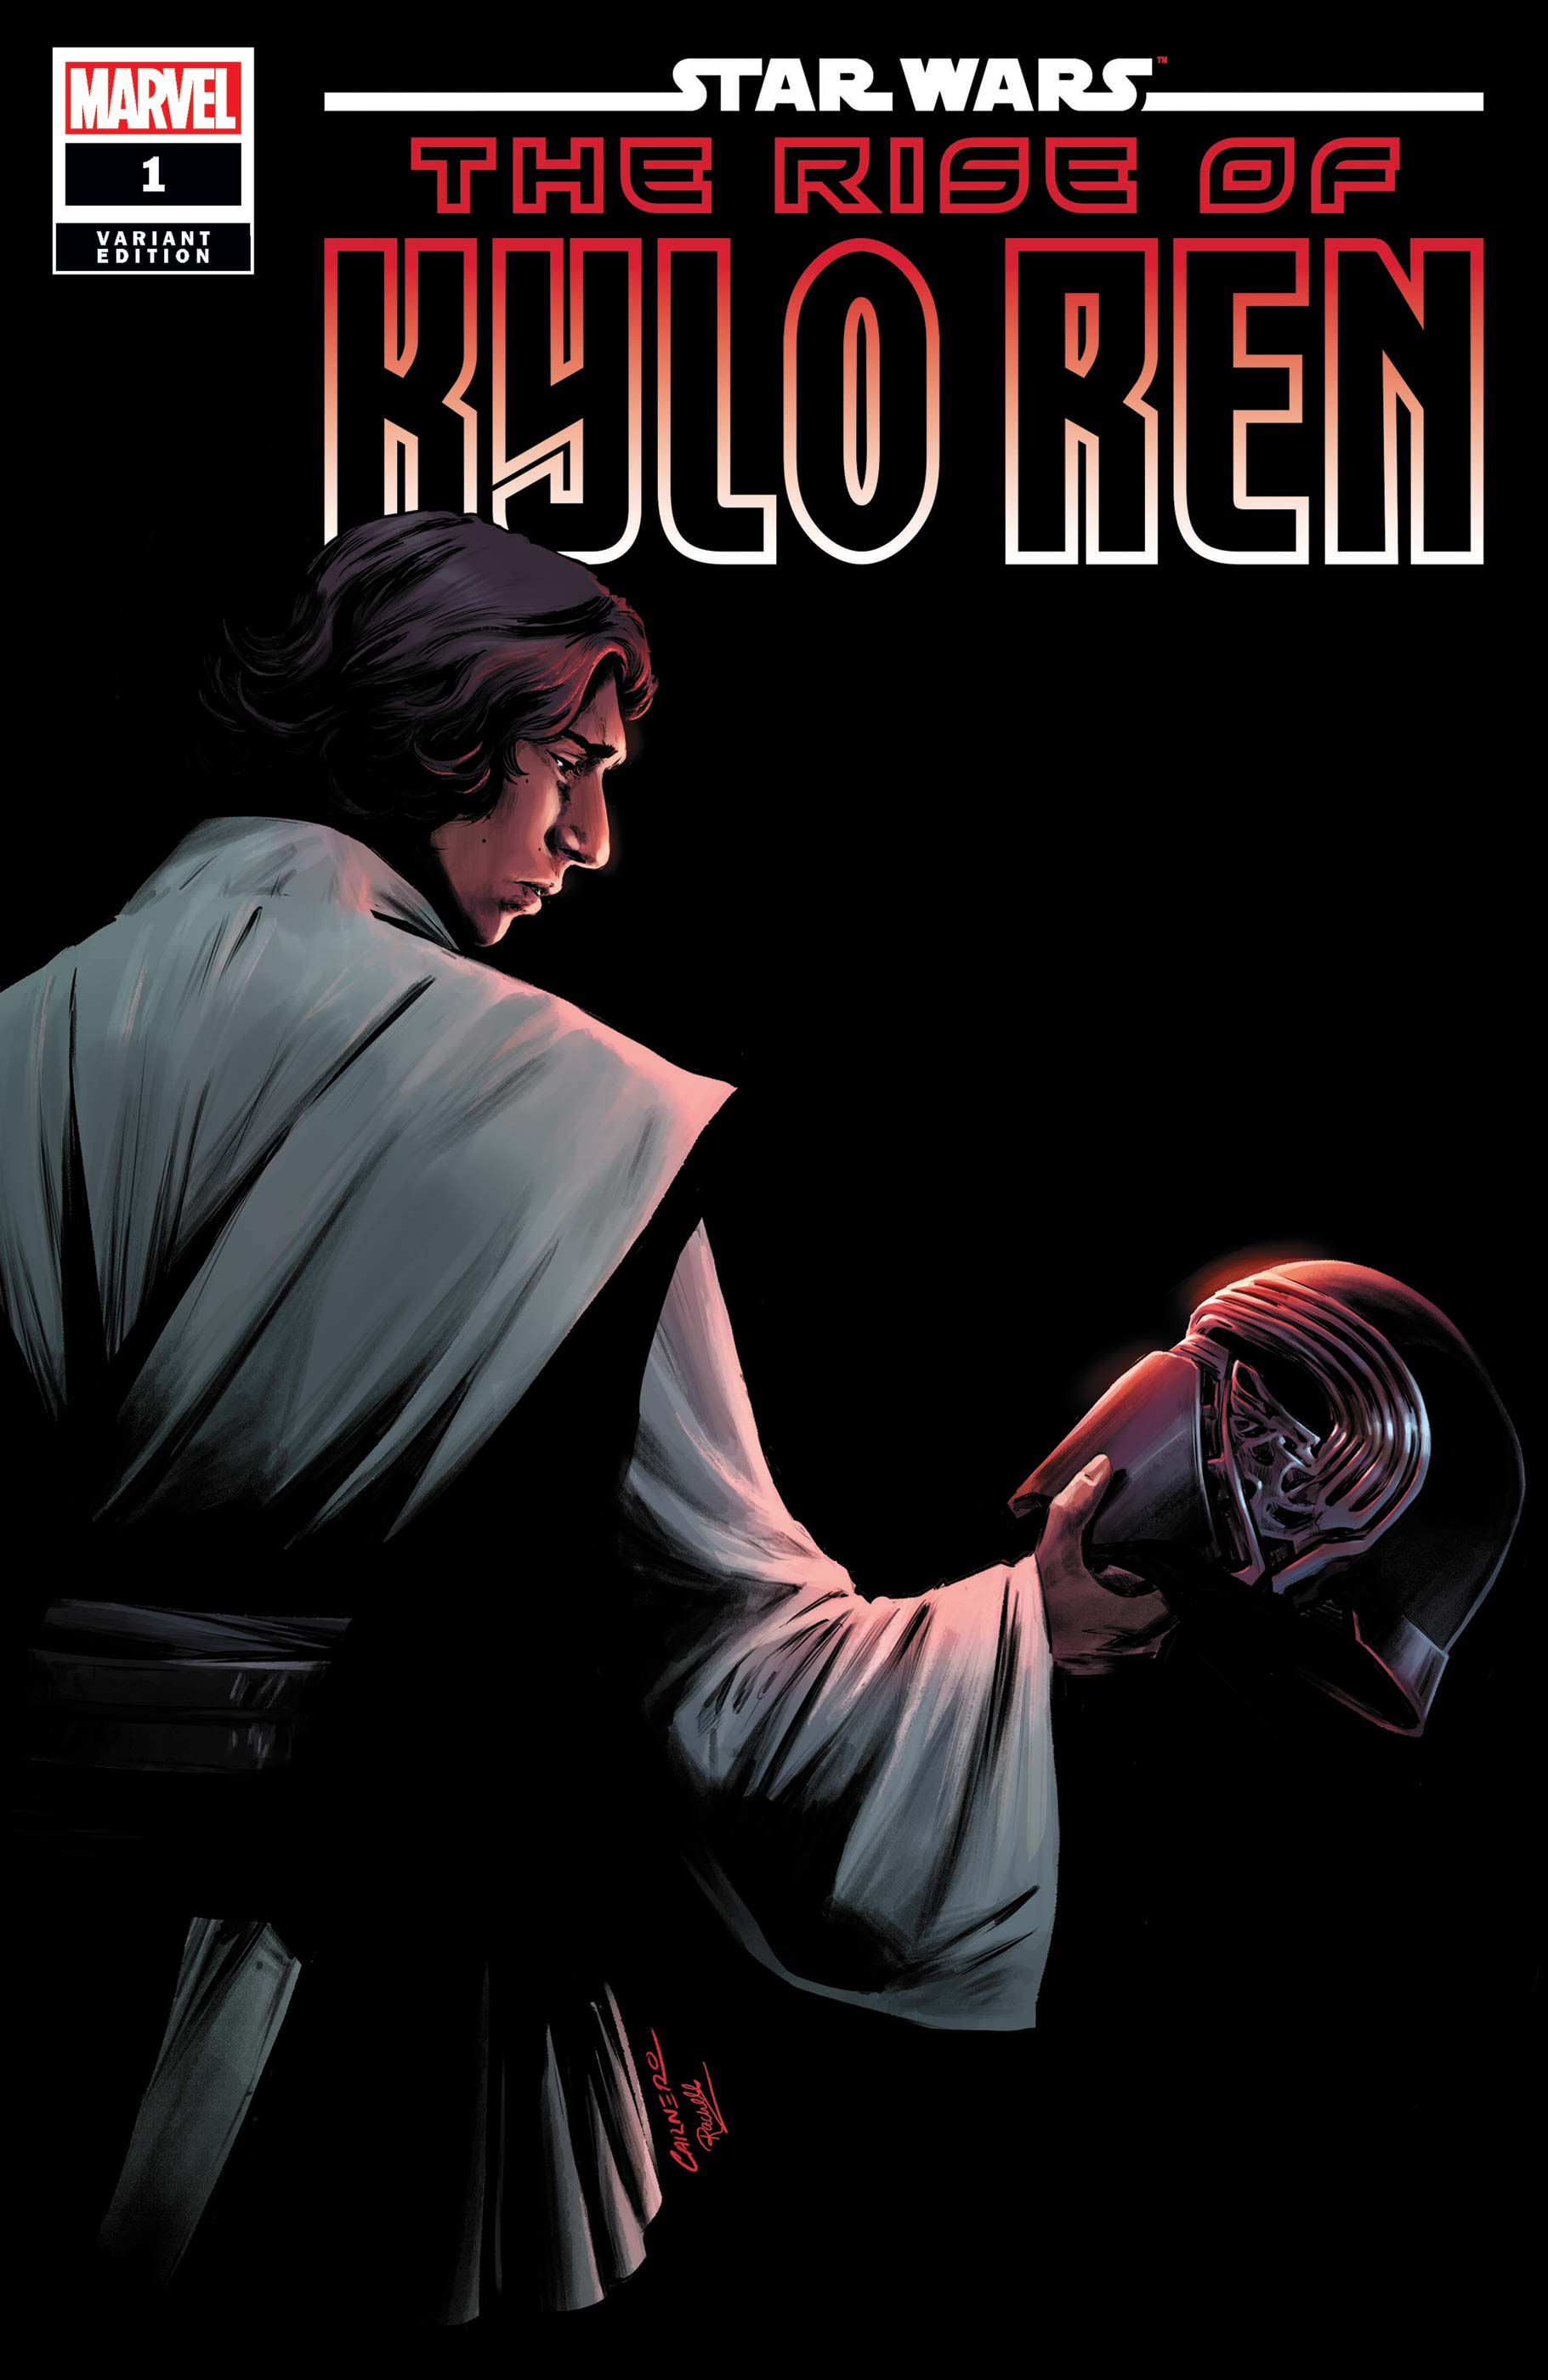 Star Wars: The Rise of Kylo Ren (2019) #1 (Variant)